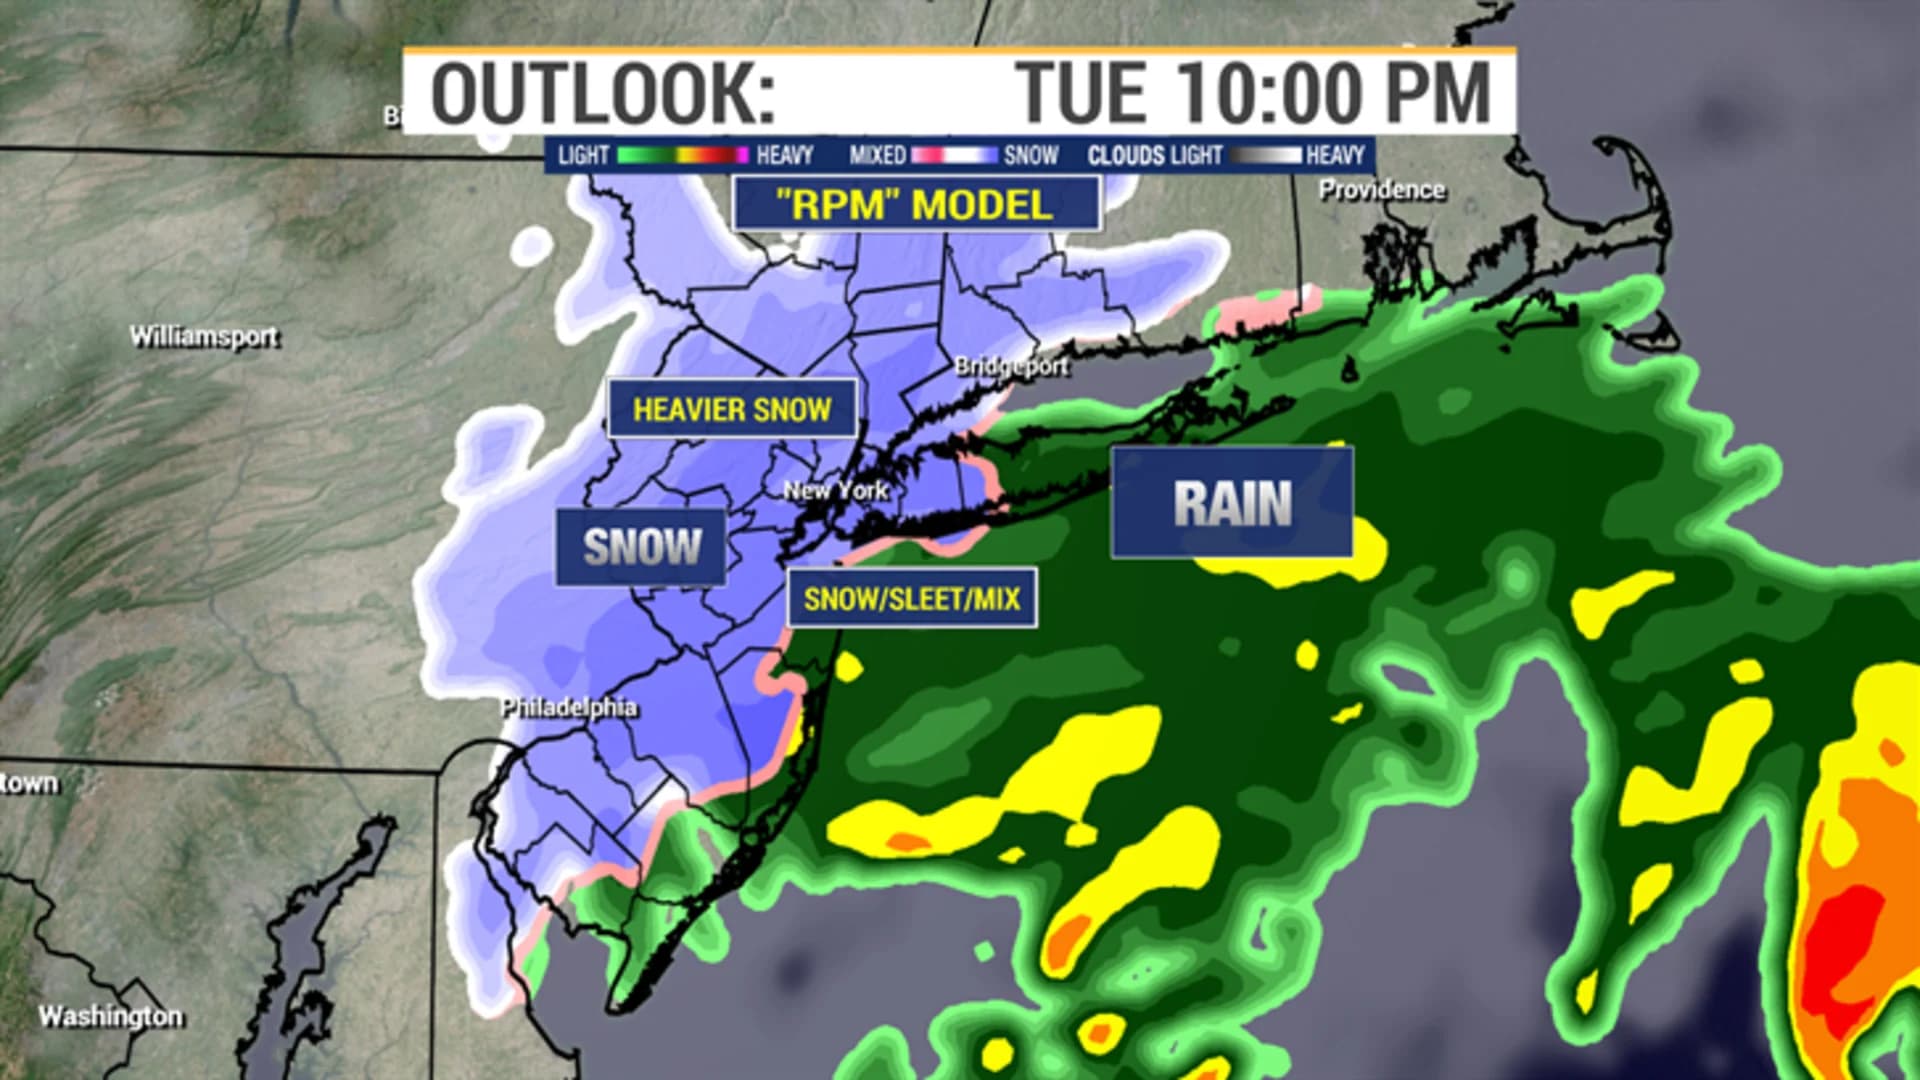 Storm set to bring rain, wintry mix, snow to LI Tuesday evening into early Wednesday